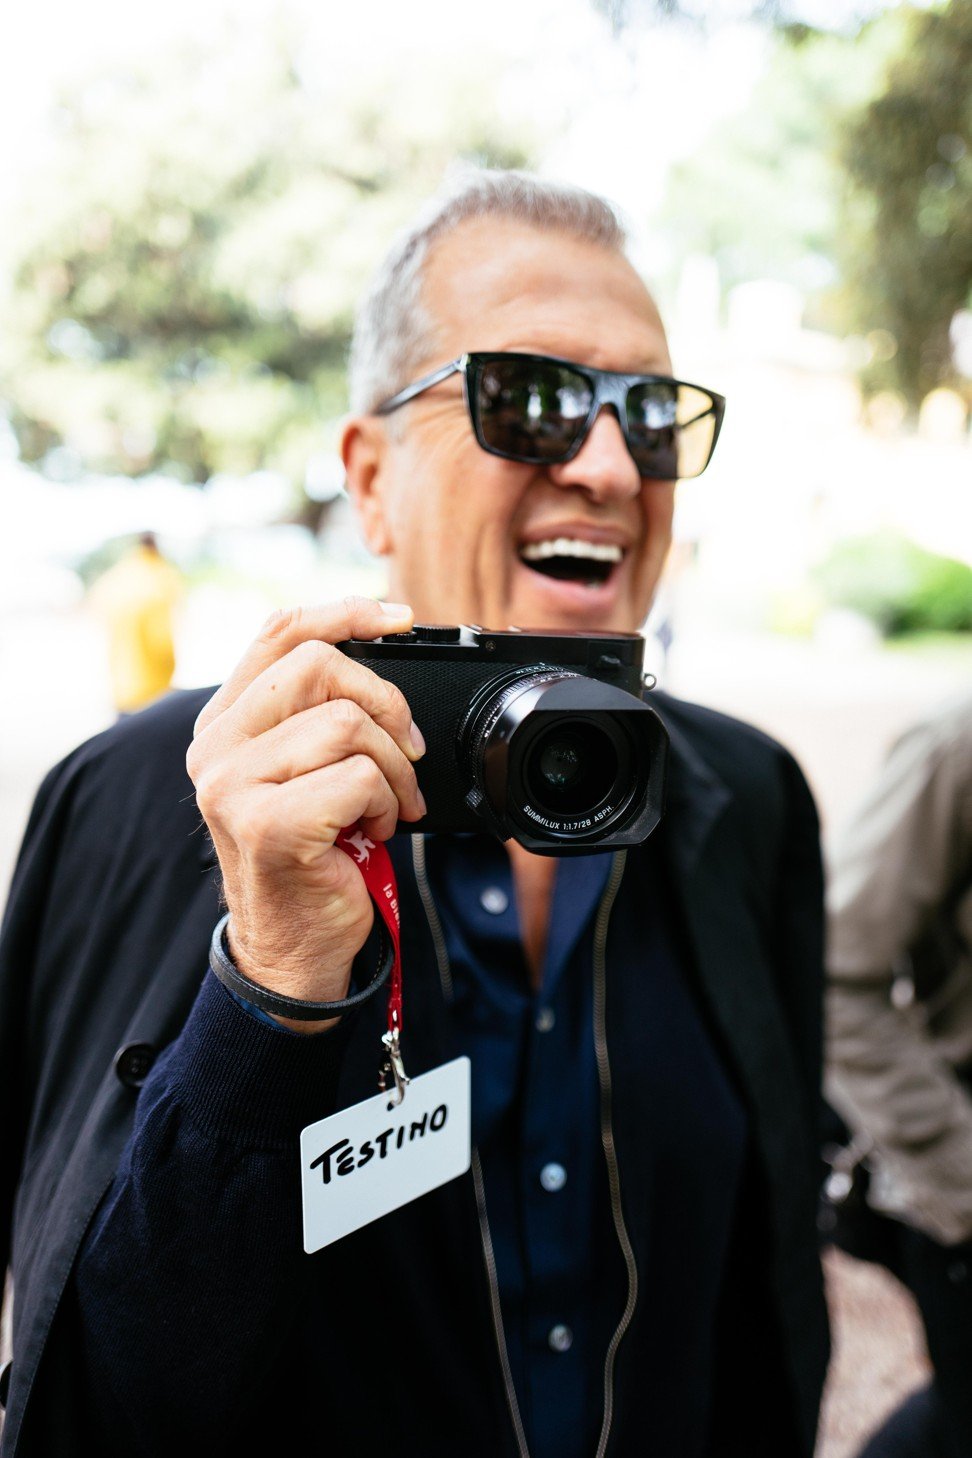 Fashion photographer Mario Testino auctions artworks at Sotheby’s ...